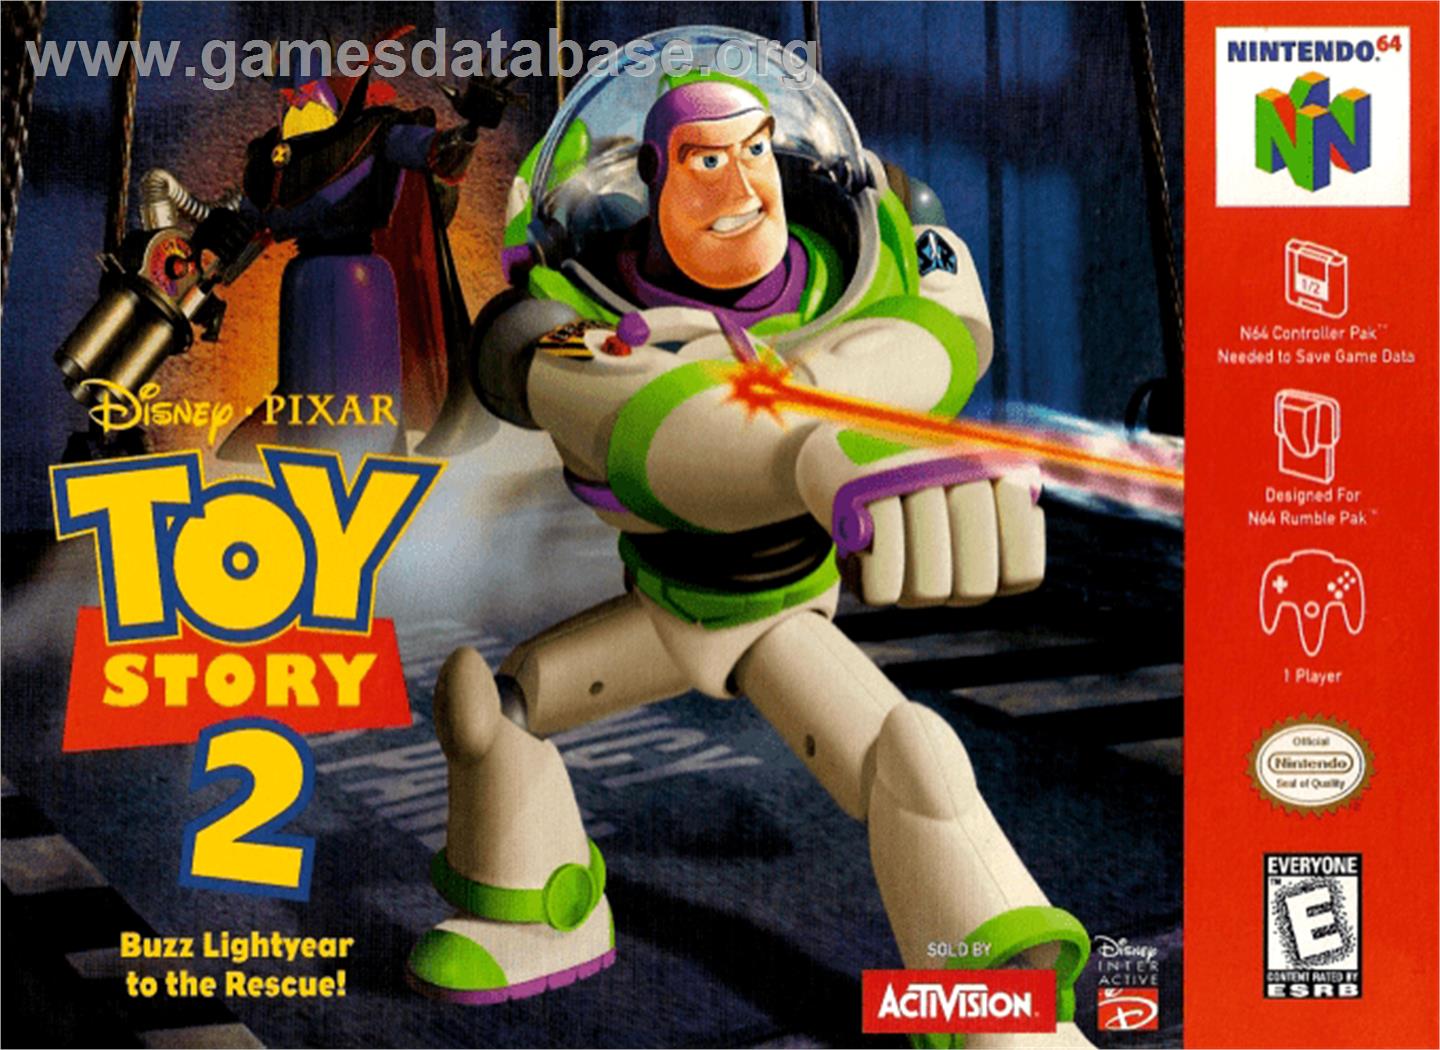 Toy Story 2: Buzz Lightyear to the Rescue - Nintendo N64 - Artwork - Box